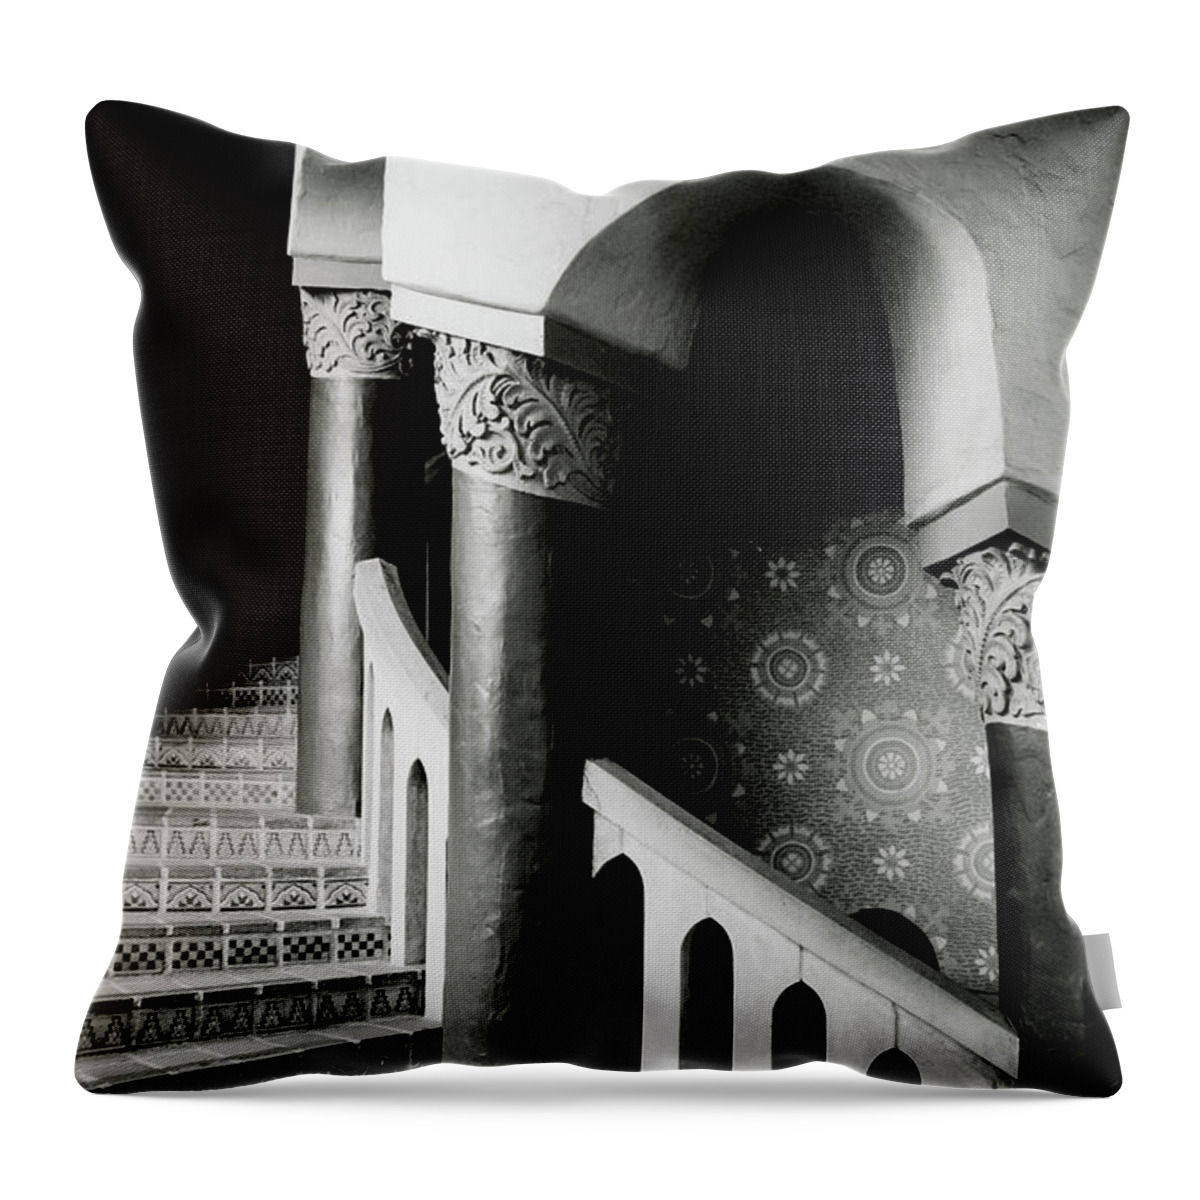 Stairs Throw Pillow featuring the mixed media Santa Barbara Spiral Stairs- Black and White Photo by Linda Woods by Linda Woods